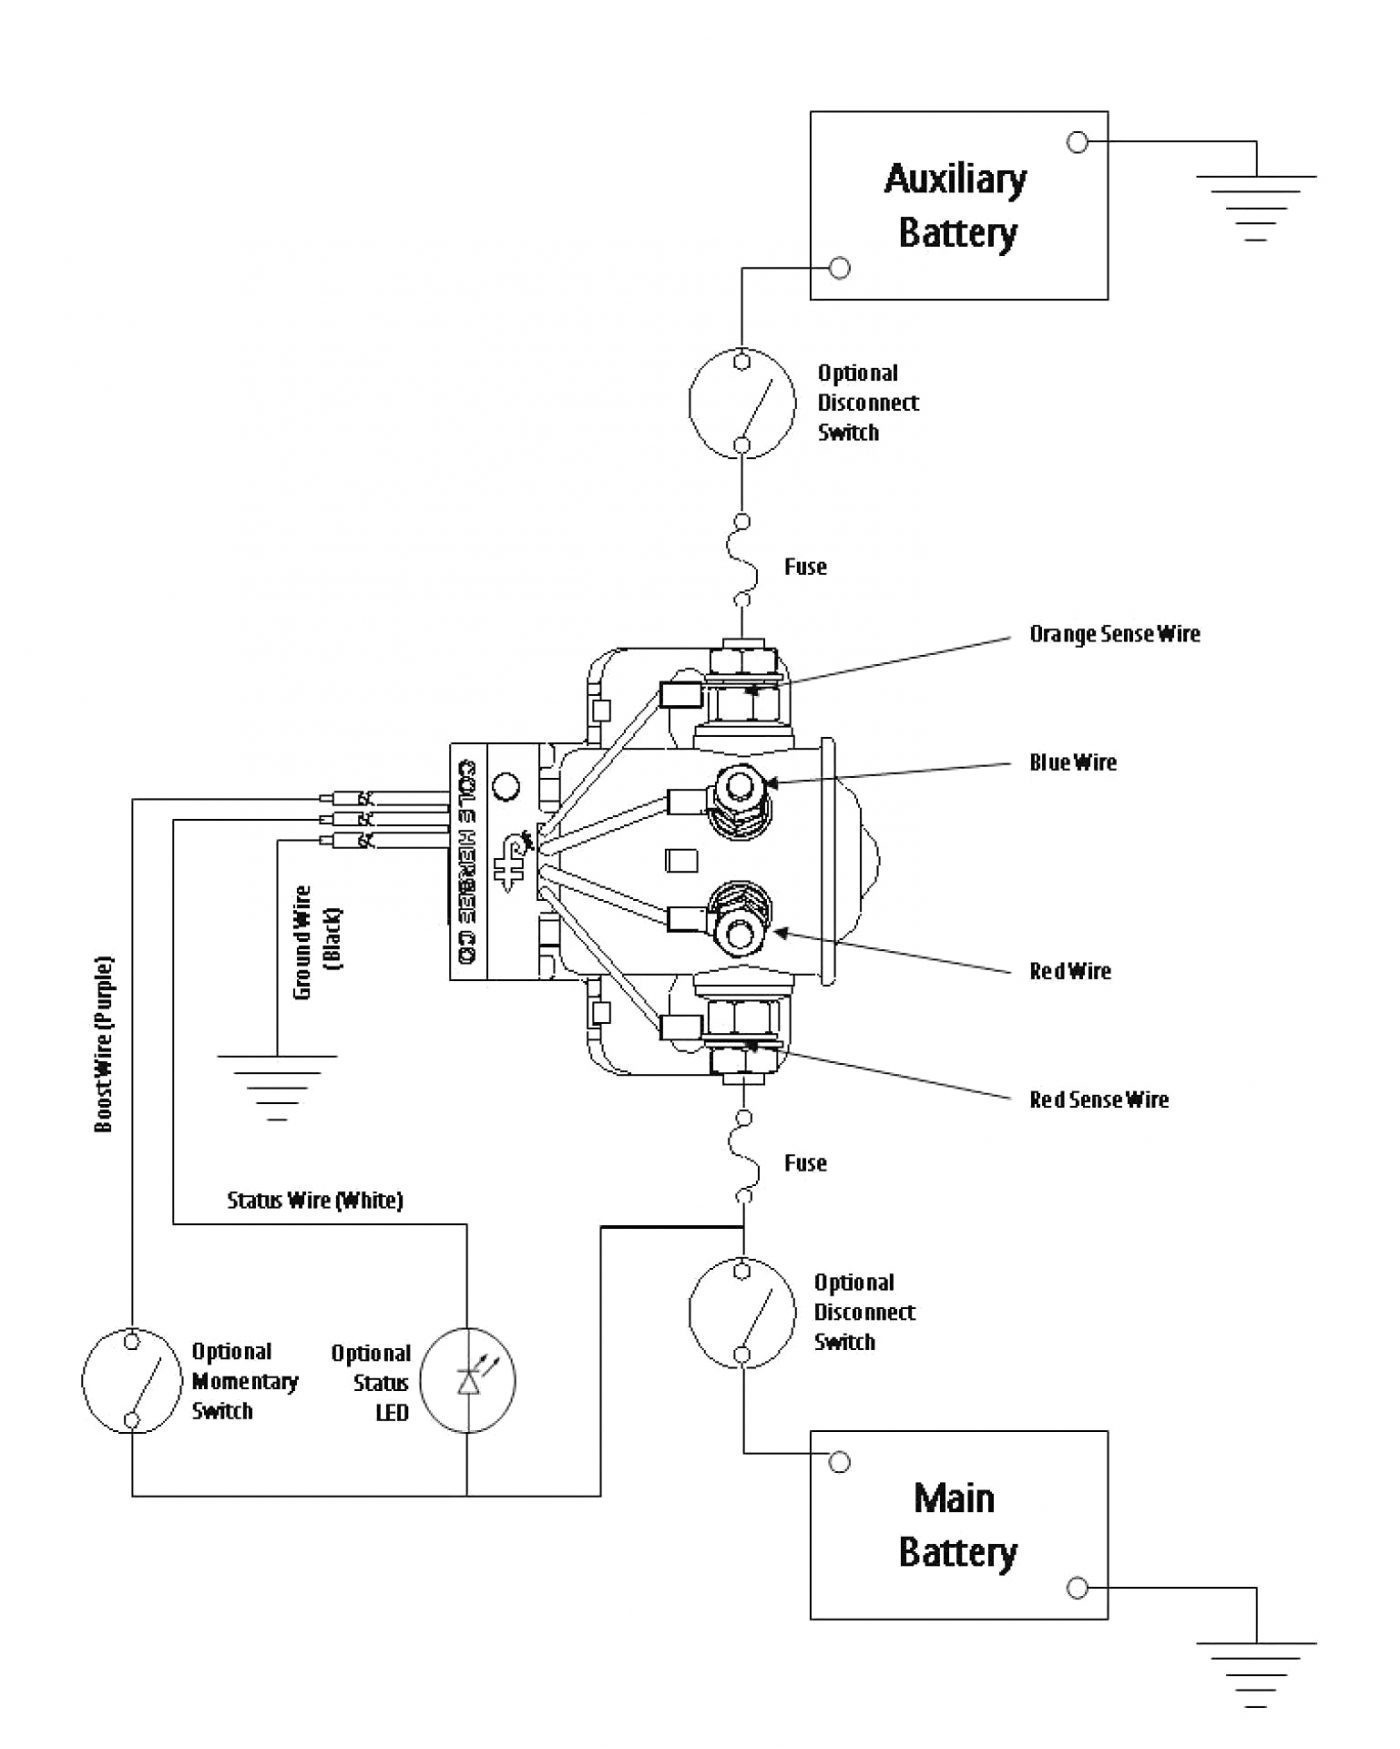 Wiring Diagram Rotary isolator Switch Refrence Wiring Diagram for isolator Switch Save Rv Battery Disconnect Switch